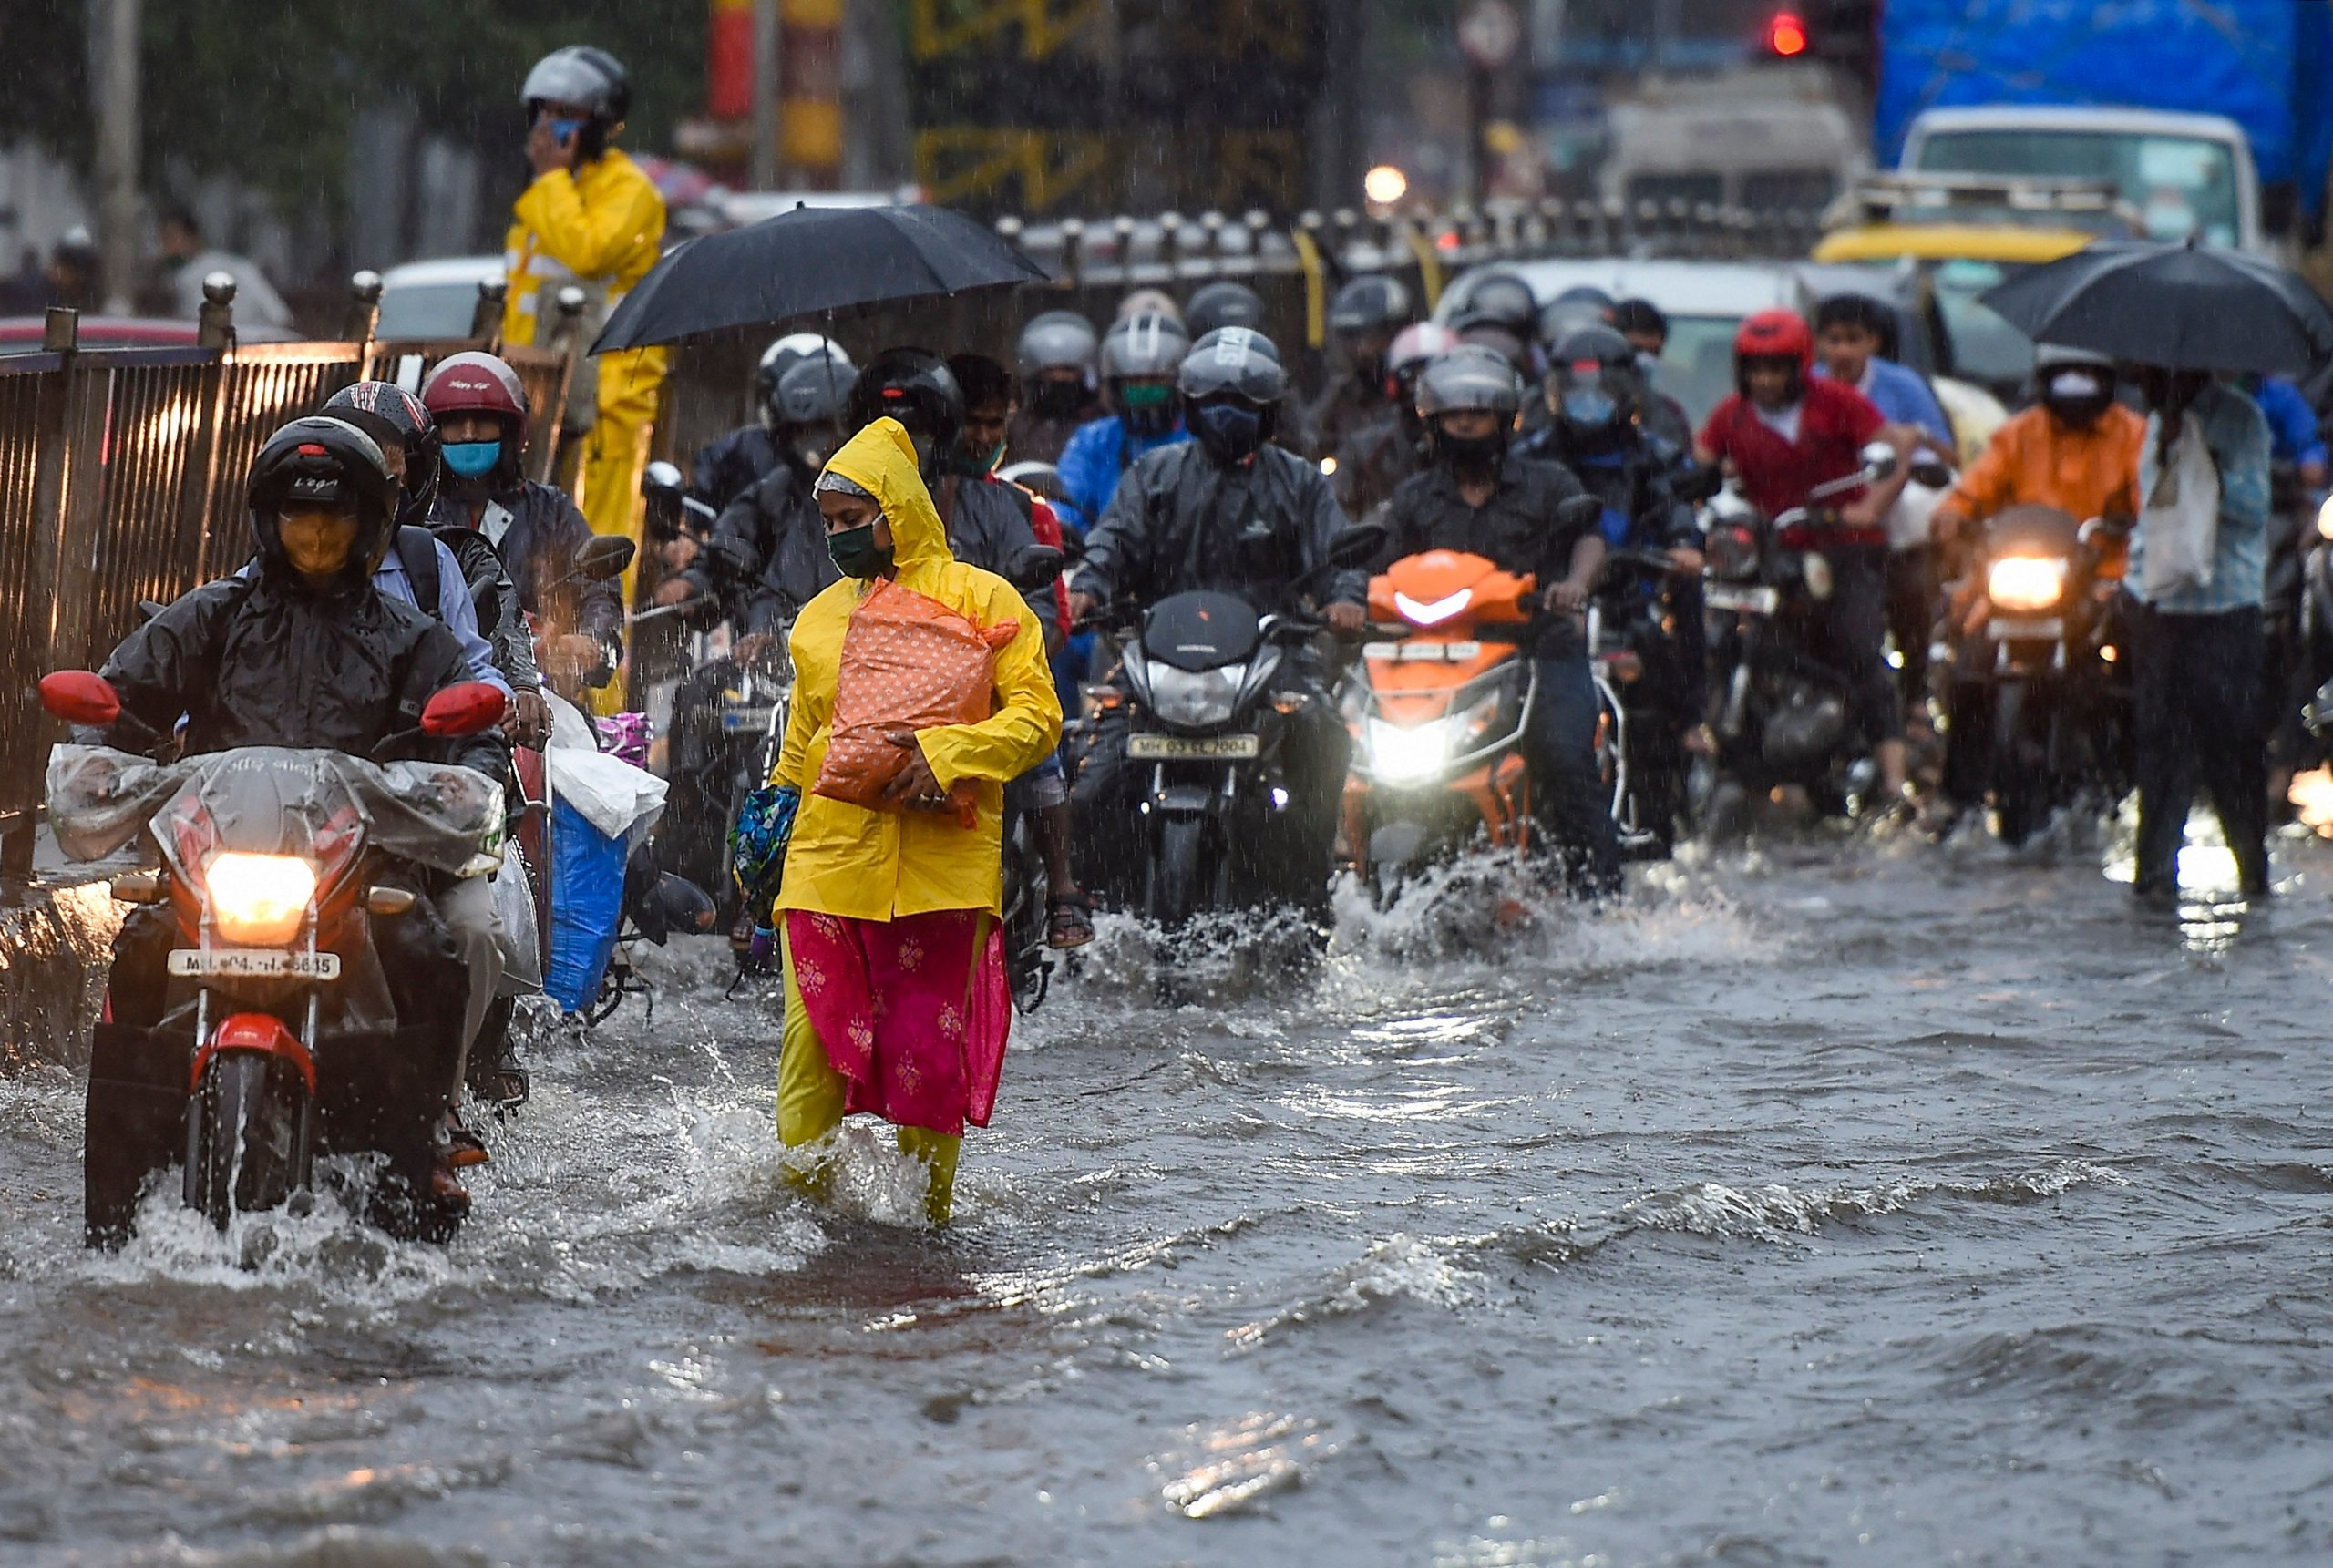 Heavy rainfall likely to hit Mumbai, Thane, says Meteorological Department